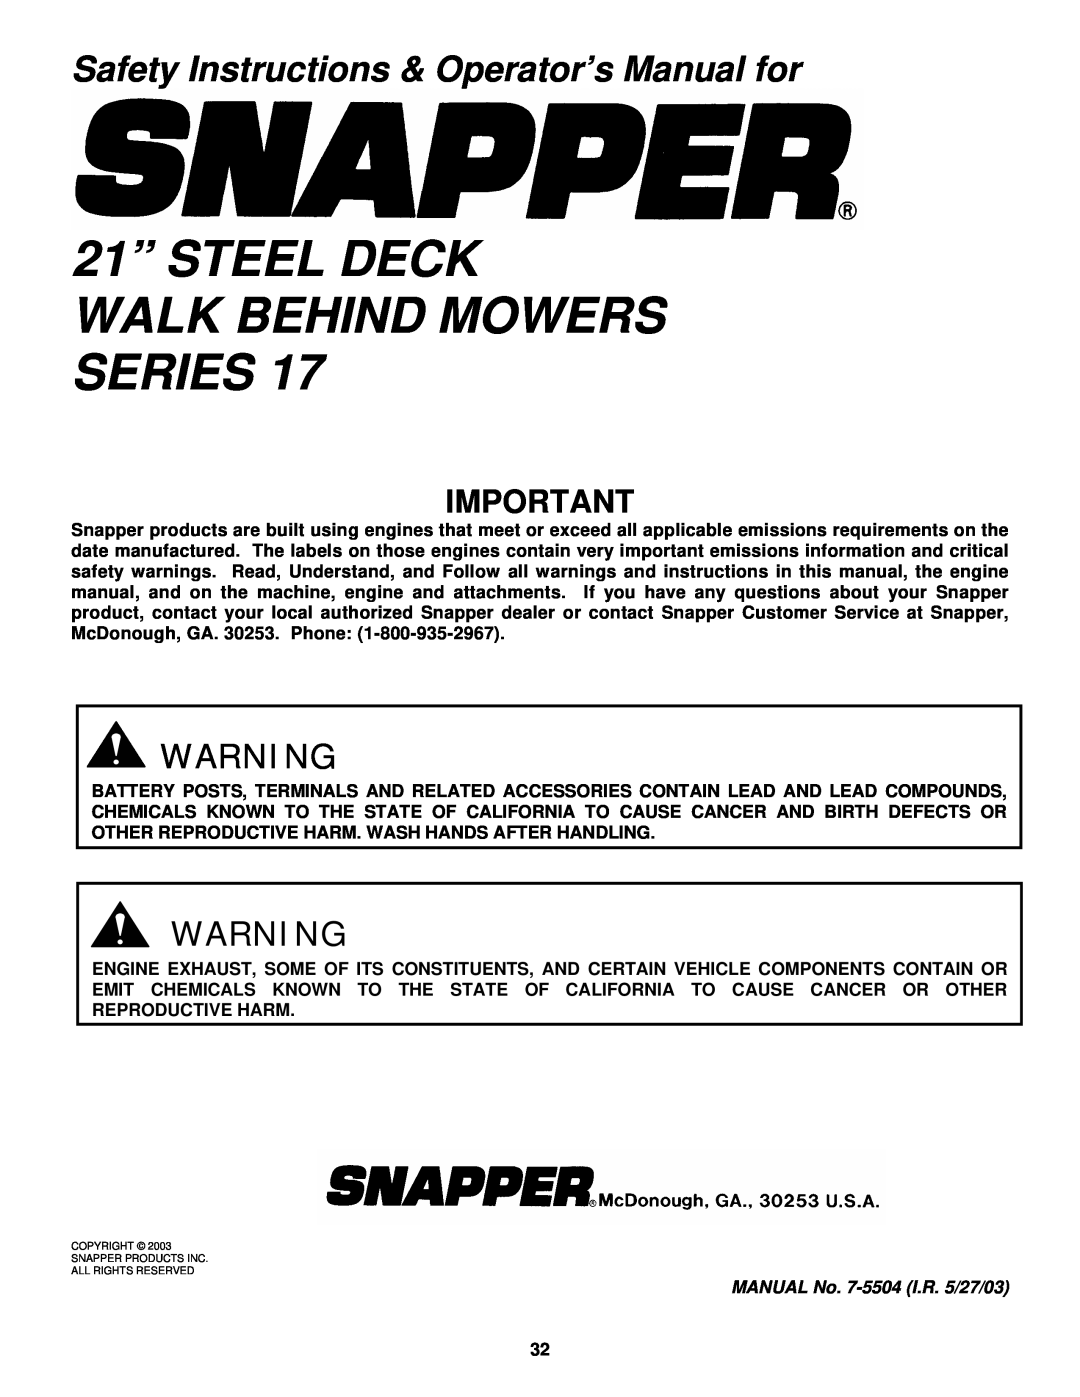 Snapper RP217017BVE, RP215517HC 21” STEEL DECK WALK BEHIND MOWERS SERIES, Safety Instructions & Operator’s Manual for 